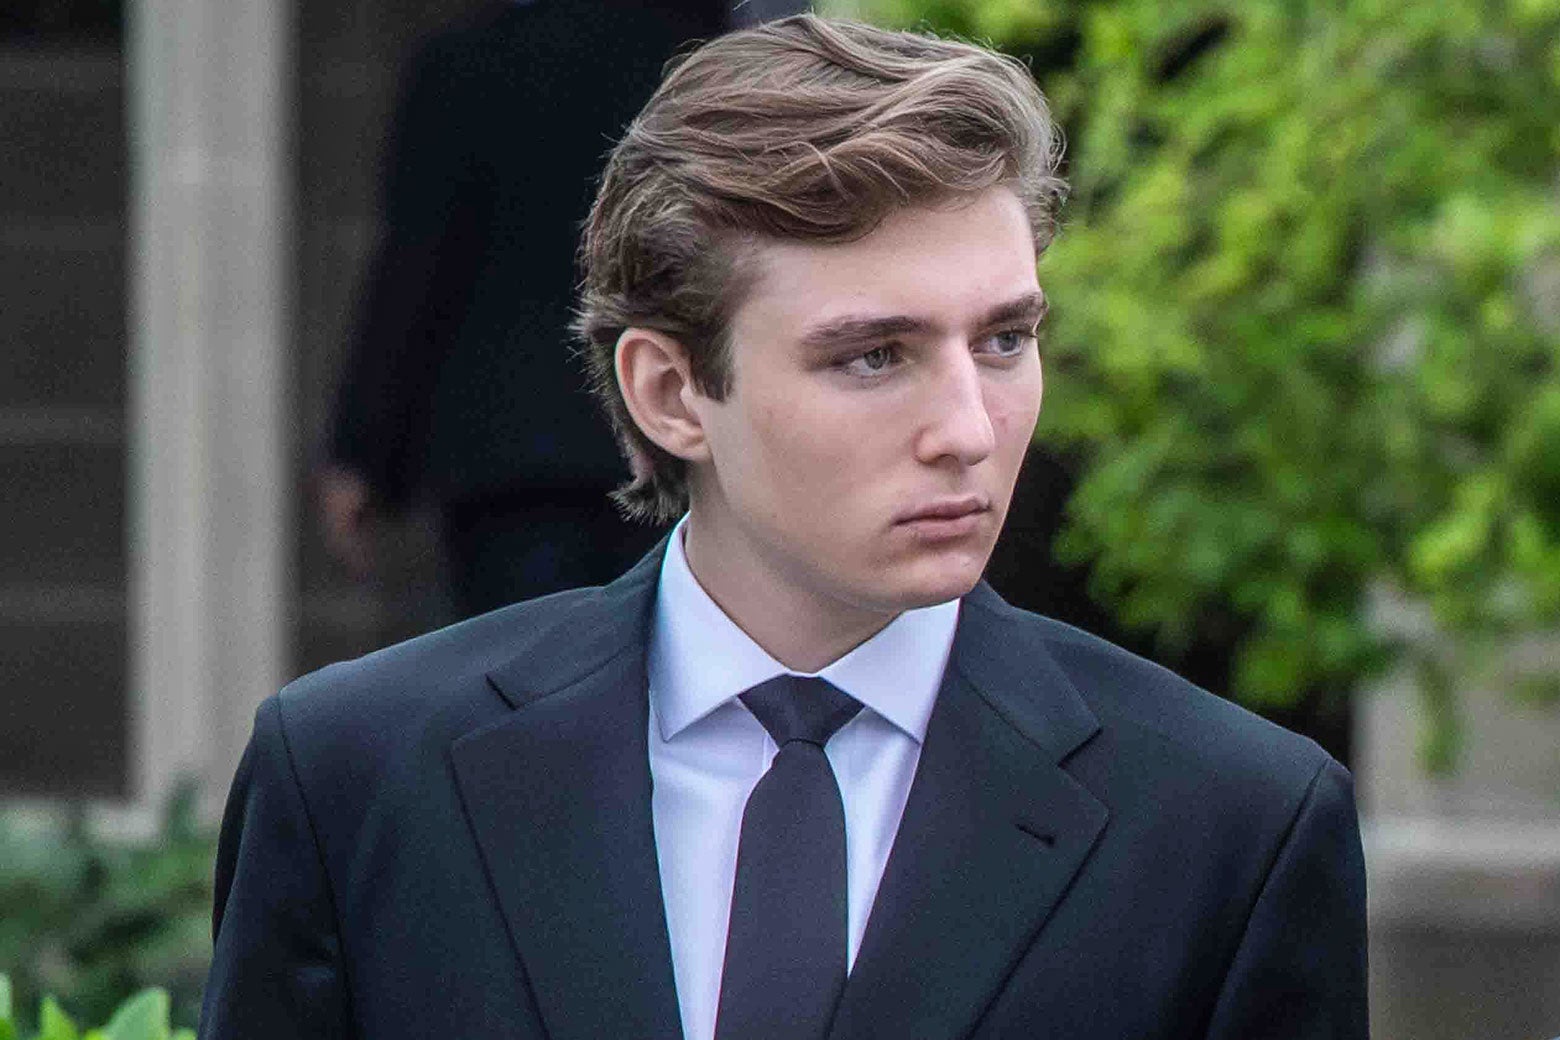 Barron Trump in a suit. He is 18 and very tall. 